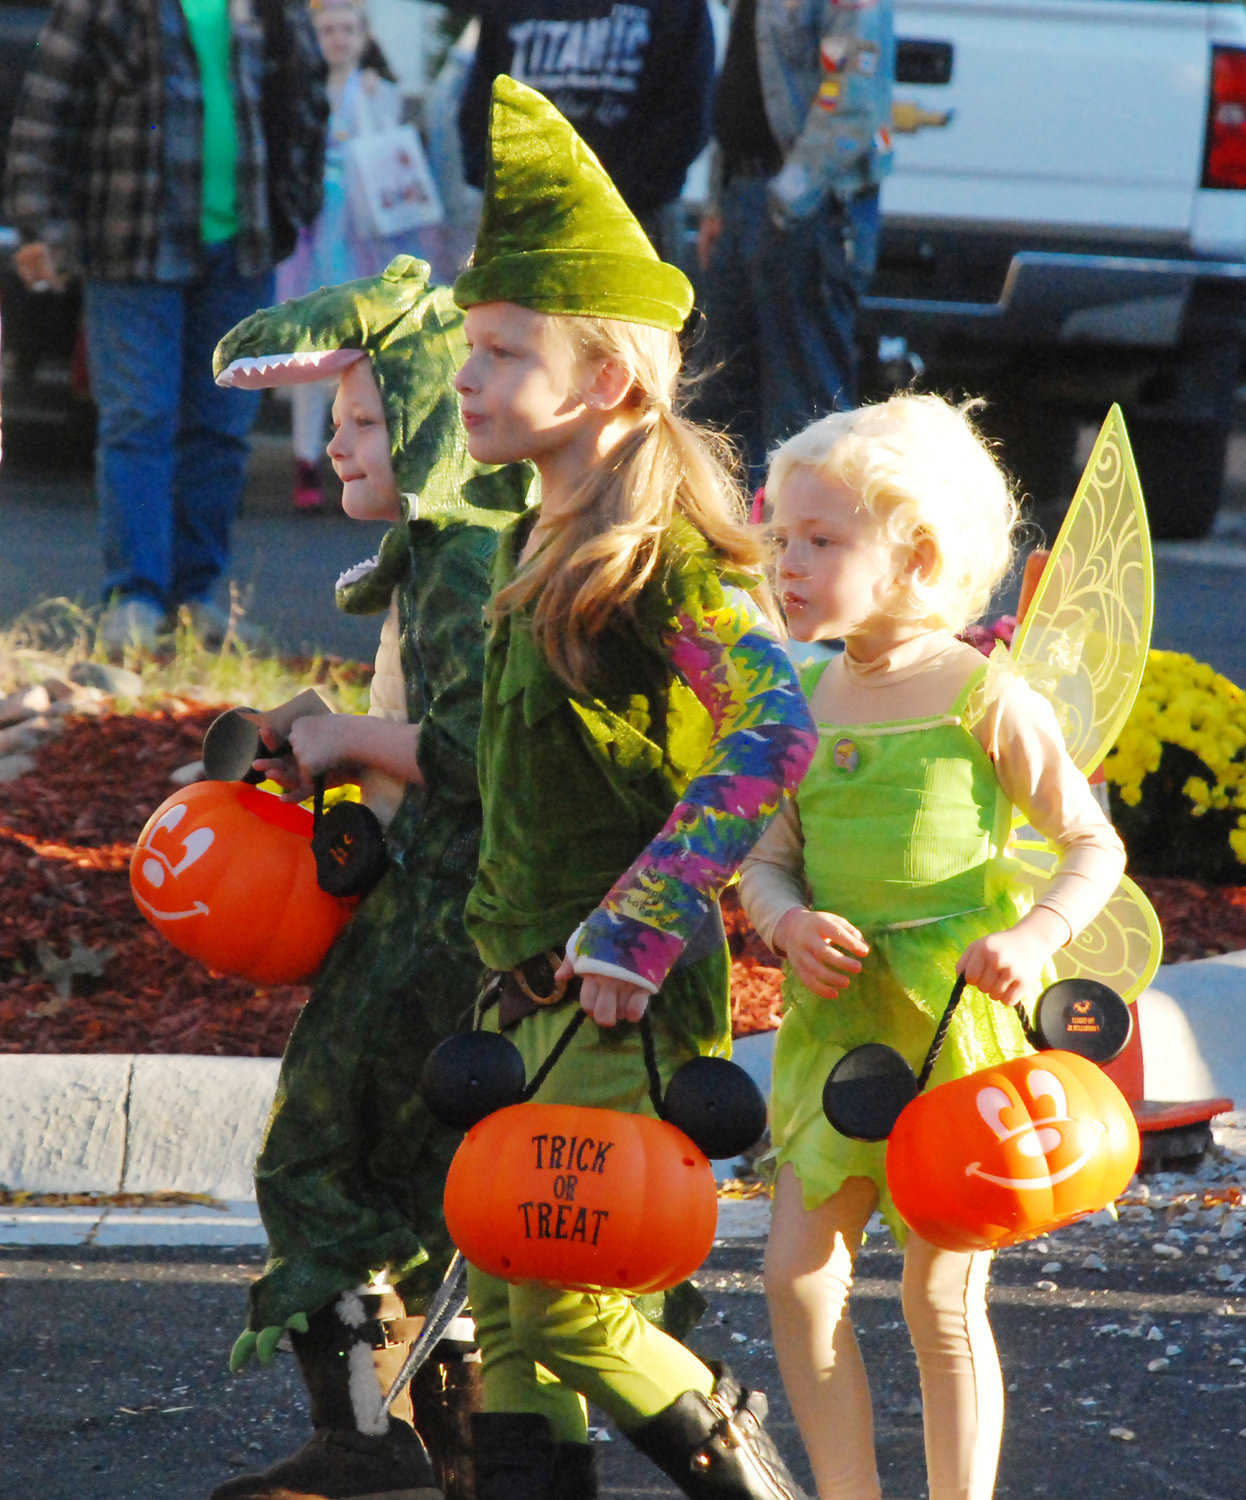 2021 MARKED THE 7TH YEAR for the 4C Sertoma Club to host a trick-or-treating event on the square in downtown Ozark.